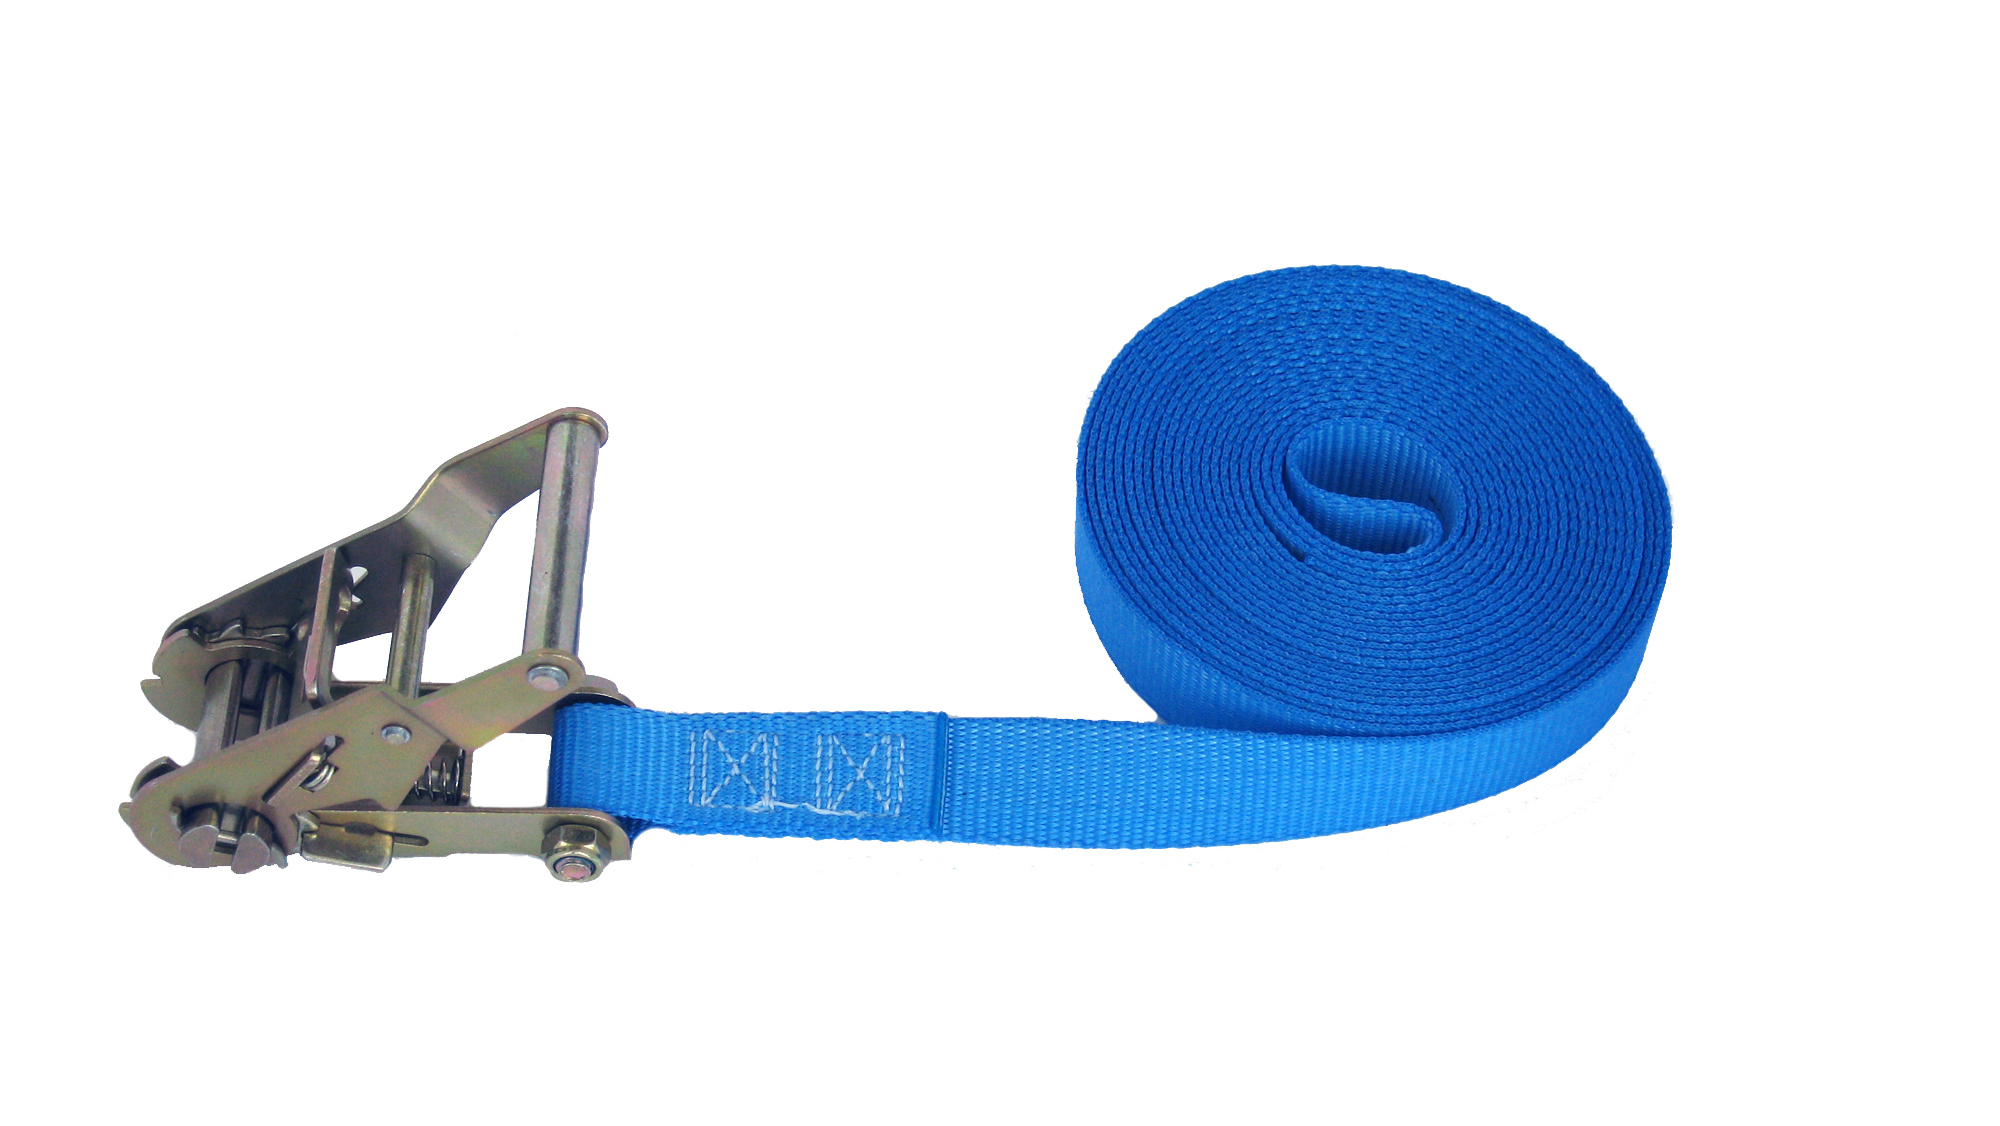 1″ ENDLESS RATCHET STRAP – CTS Cargo Tie-Down Specialty